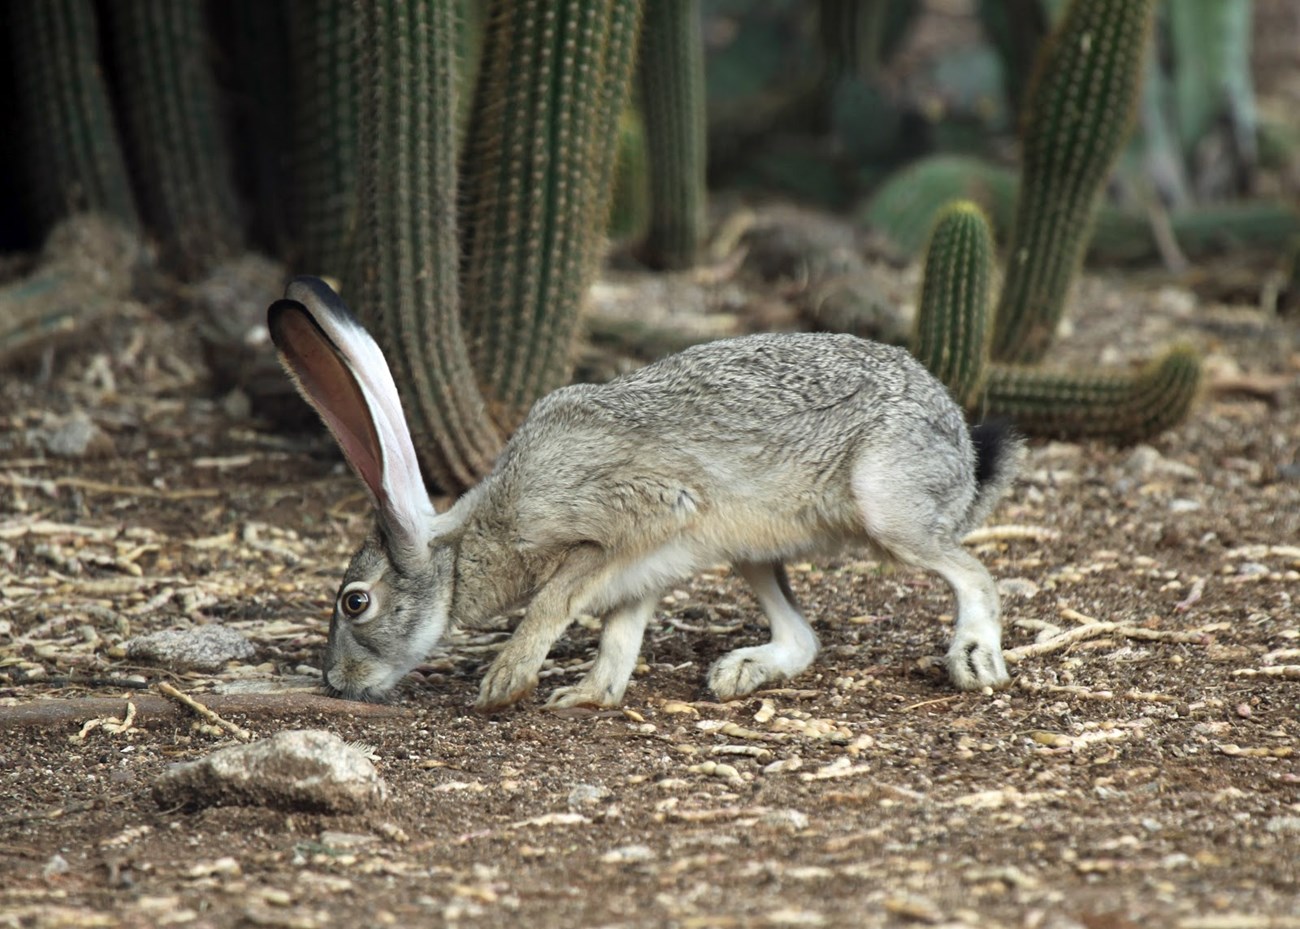 A jackrabbit with large ears and a black tail sniffs the ground.